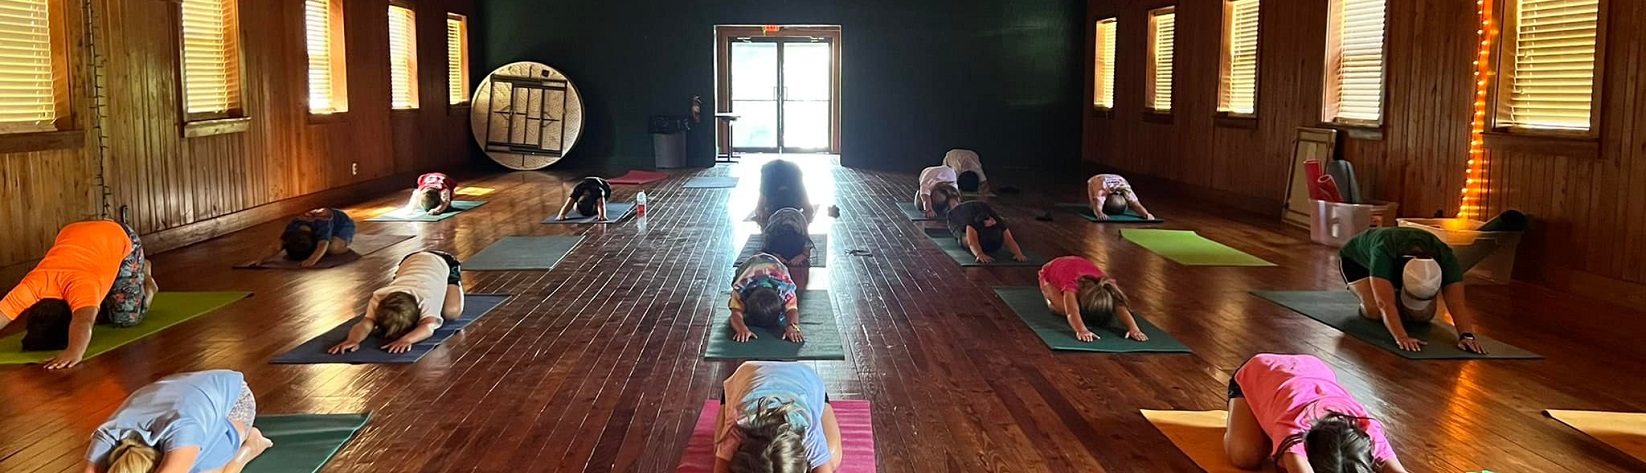 4-H Kids learning yoga at camp